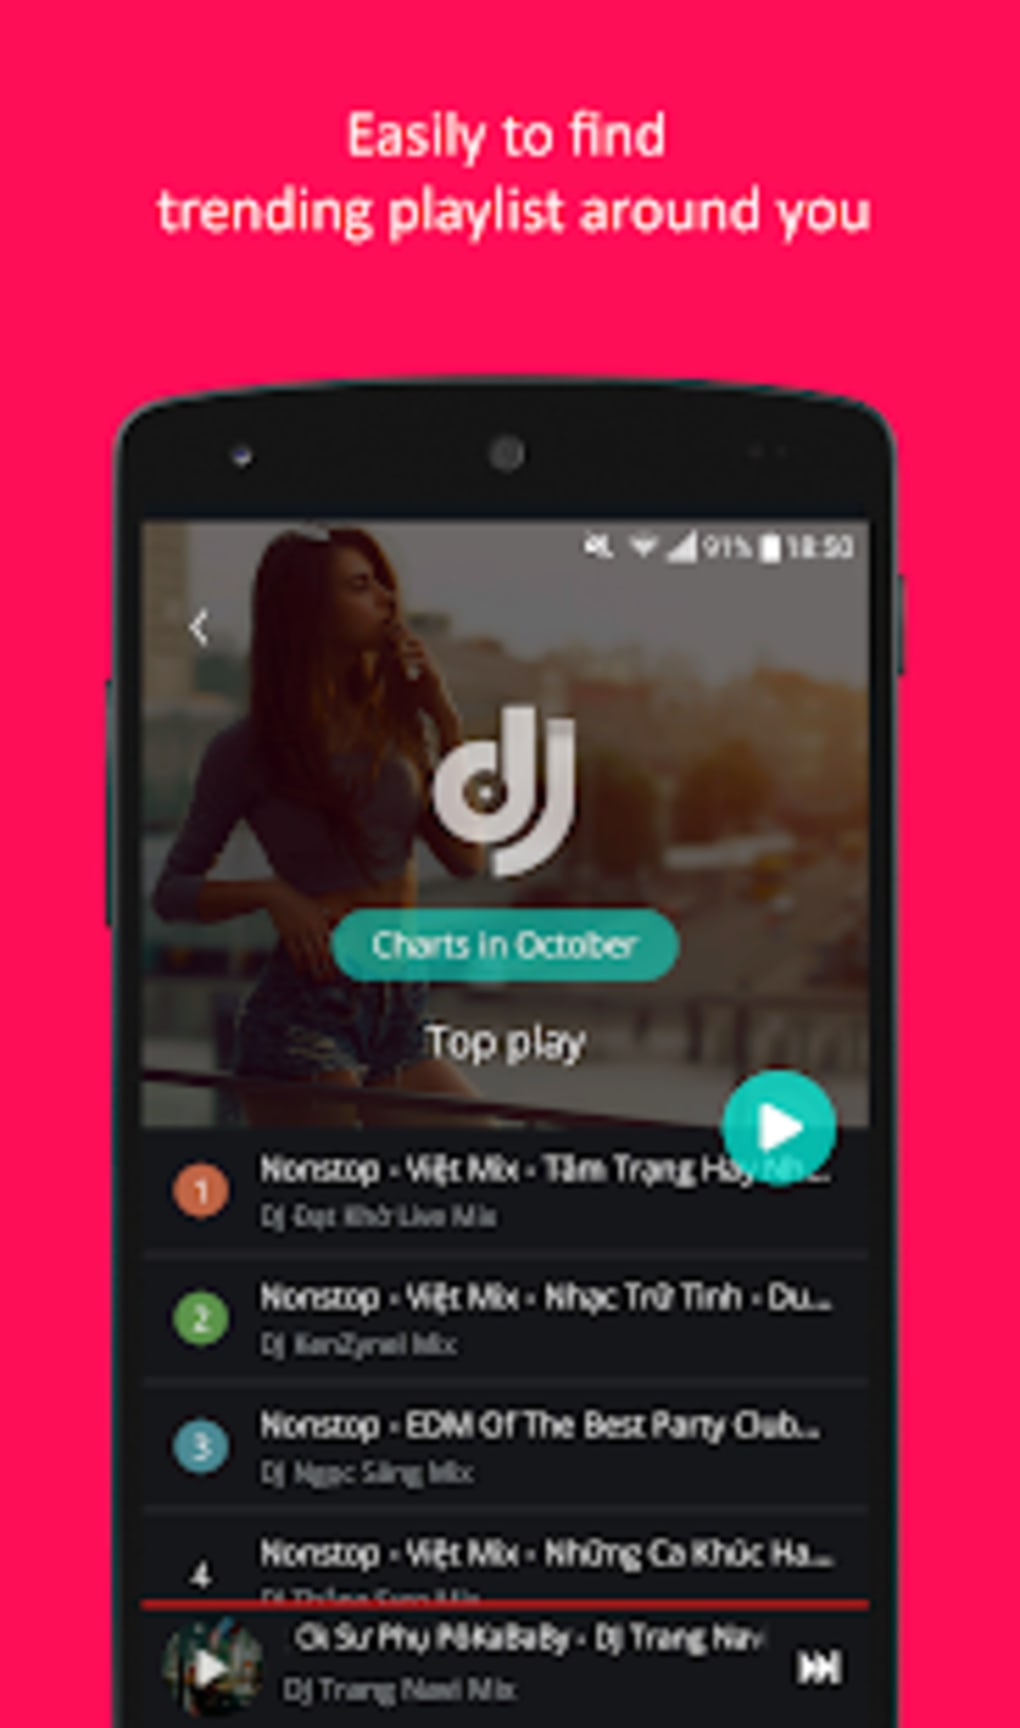 Free Dance Music APK for Android Download